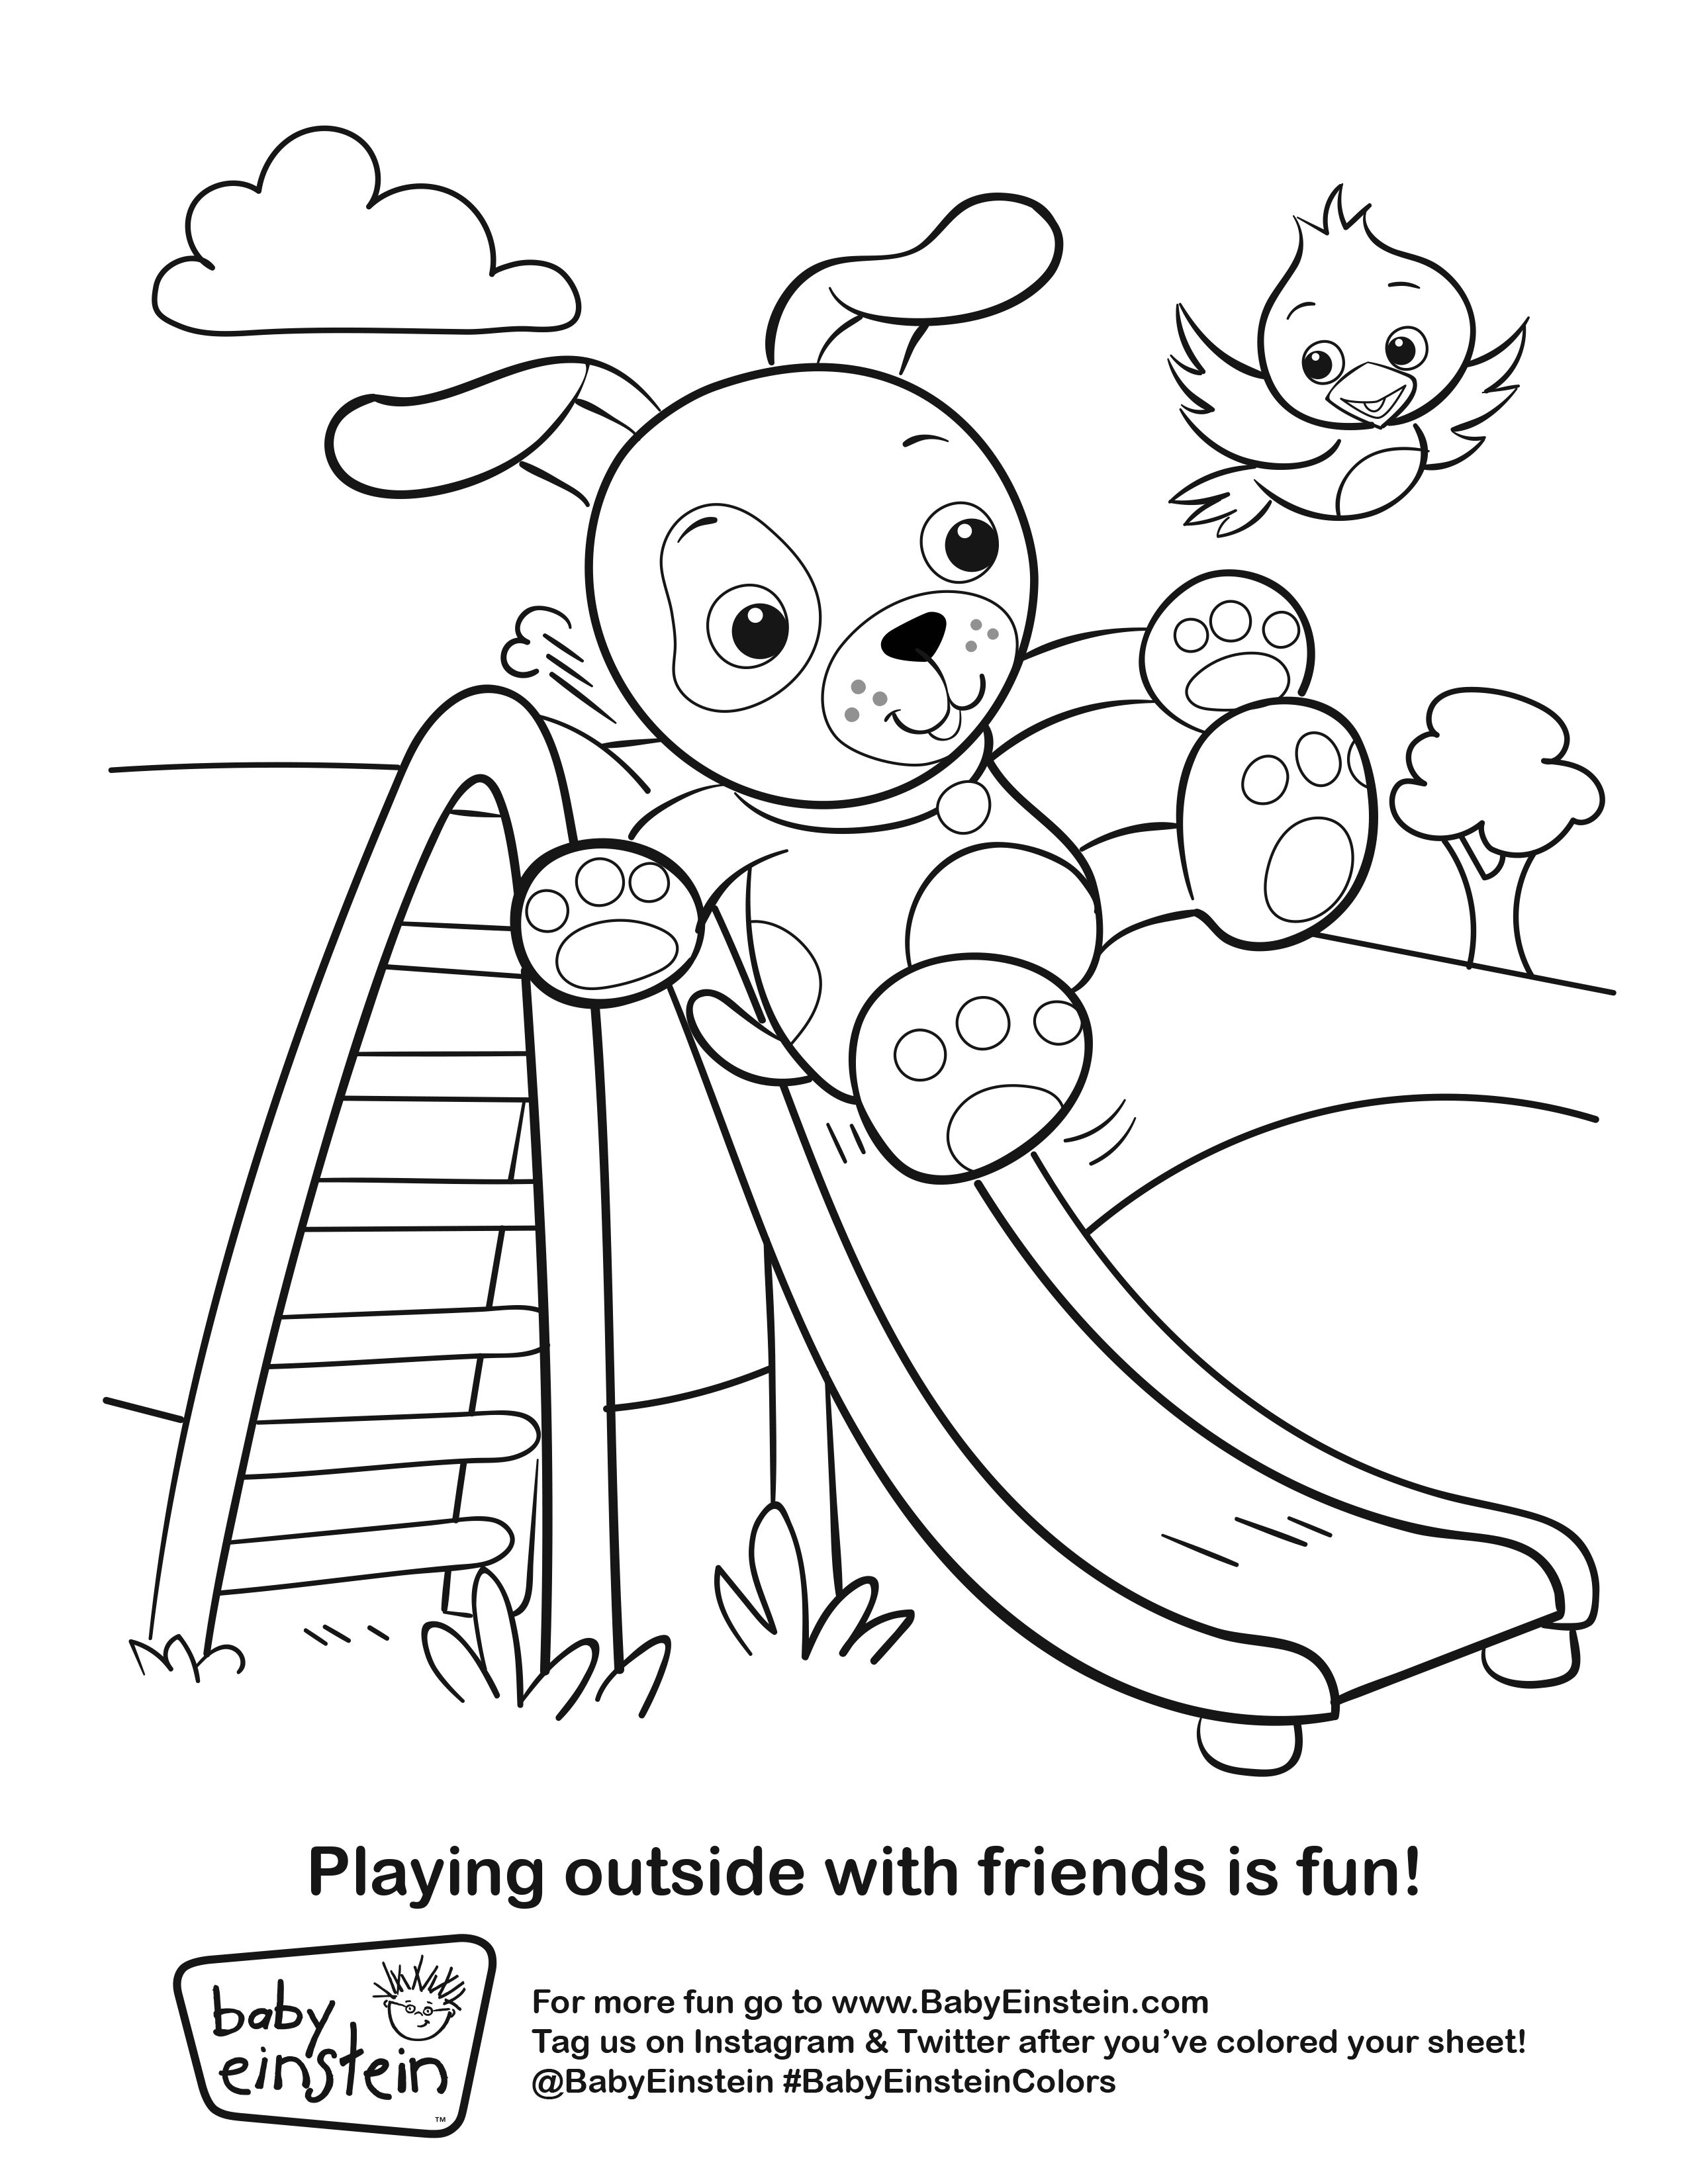 Summer is here! Give your little artist a chance to get creative by  printing out this coloring sheet. #Ba… | Coloring pages, Baby einstein, Coloring  pages for kids